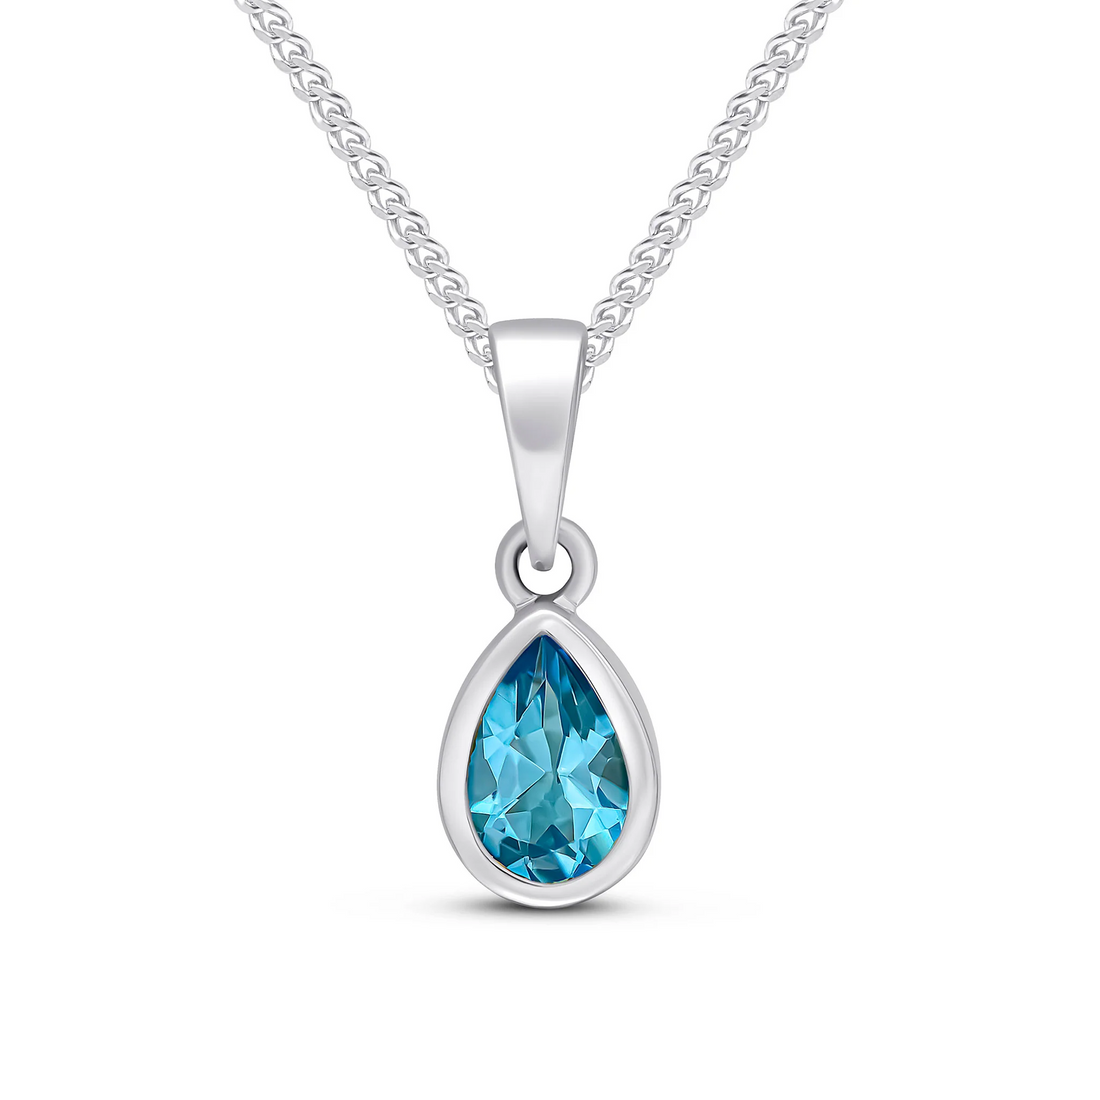 9CT Gold Pear Shaped Swiss Blue Topaz Rubover Pendant (6x4mm)